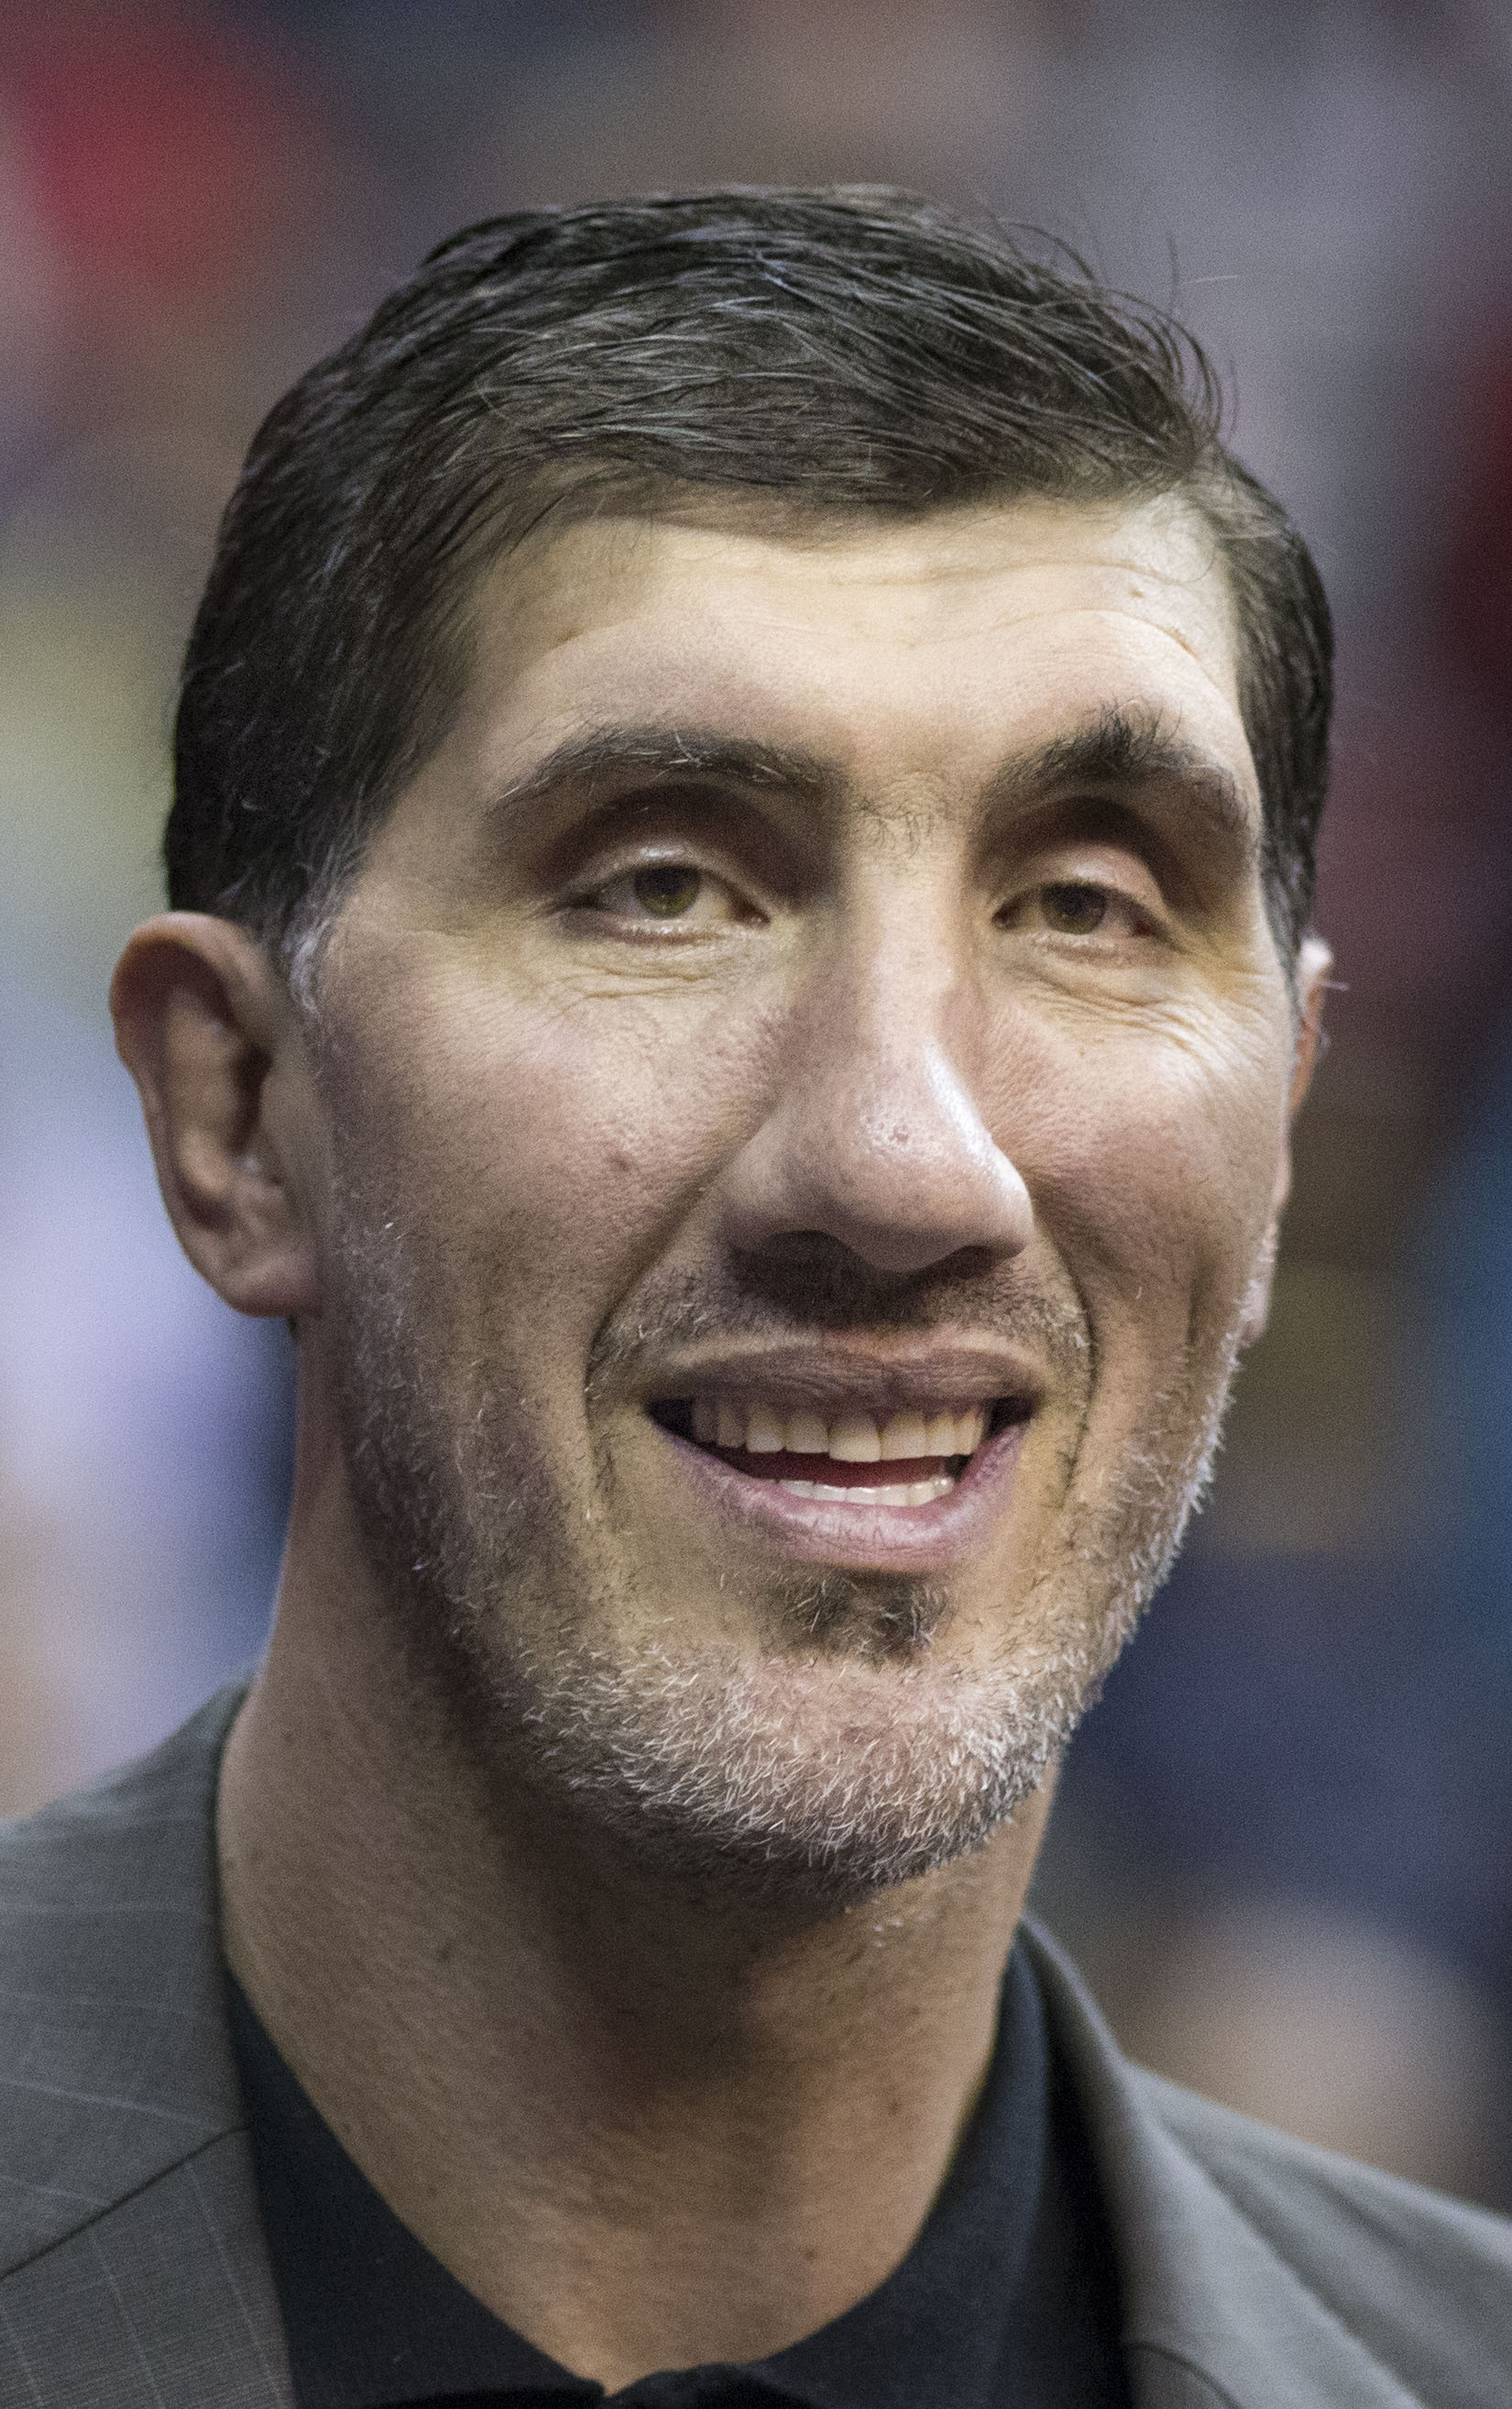 How tall is Gheorghe Muresan?